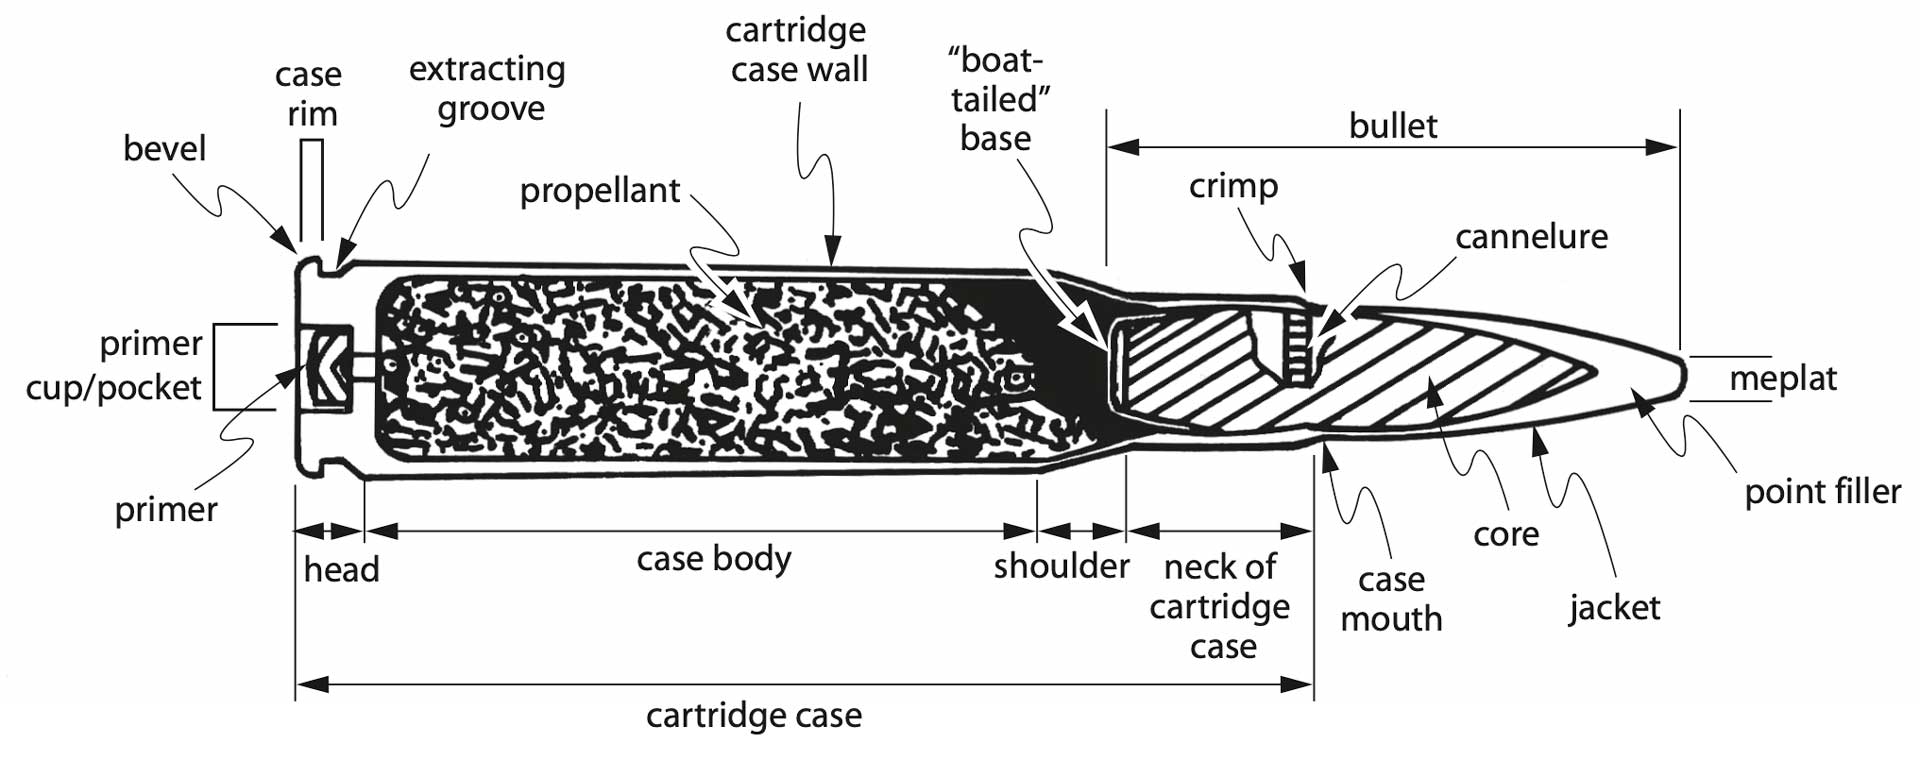 centerfire rifle ammunition cartridge case cutaway view drawing schematic text on image noting components